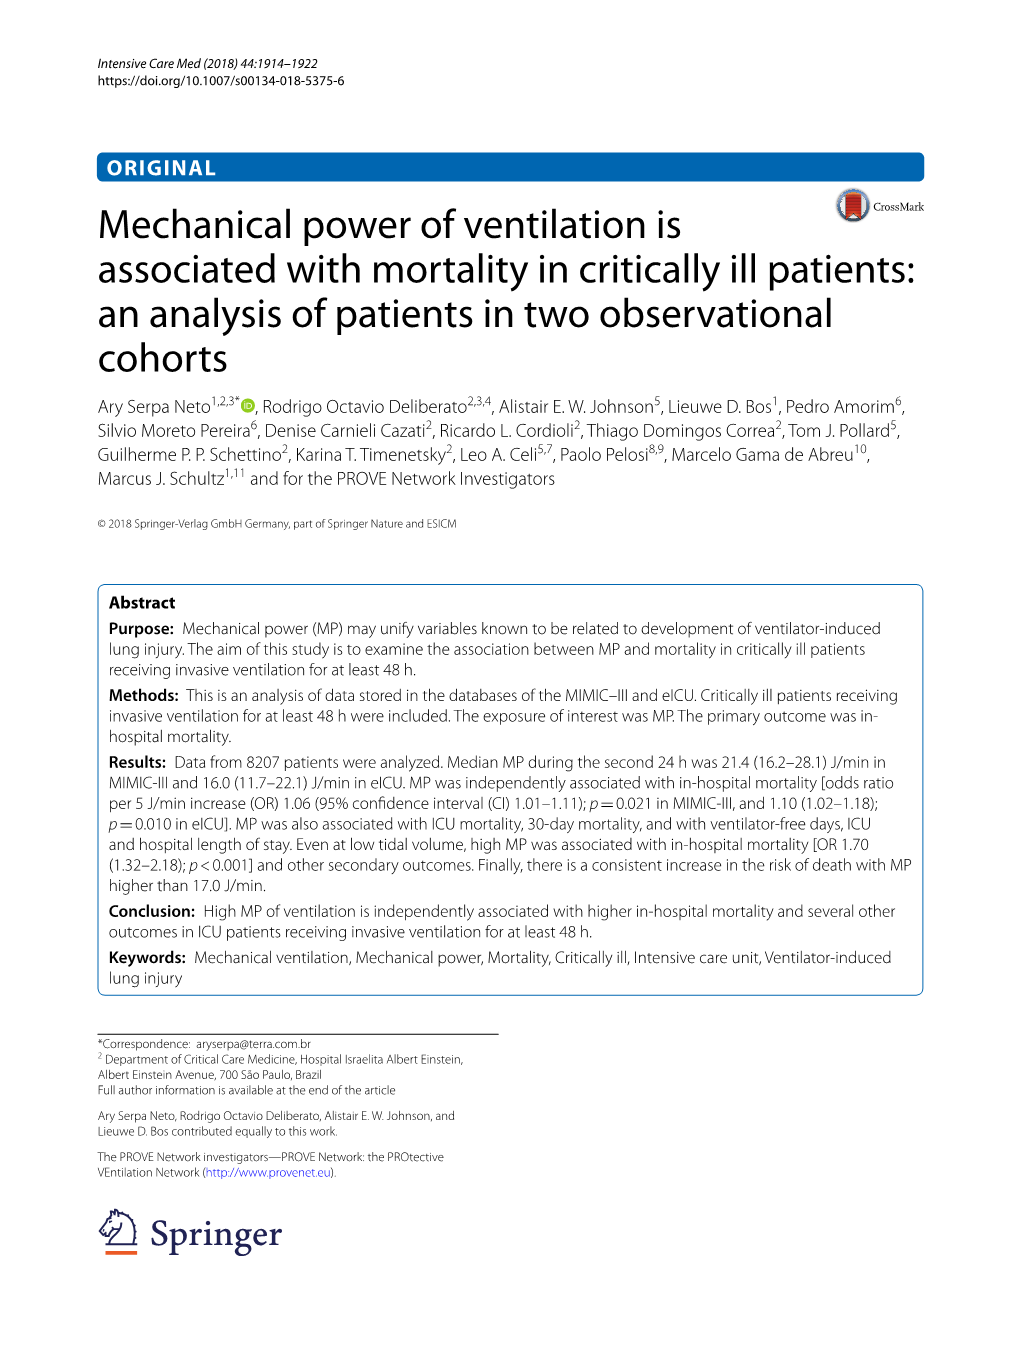 Mechanical Power of Ventilation Is Associated with Mortality in Critically